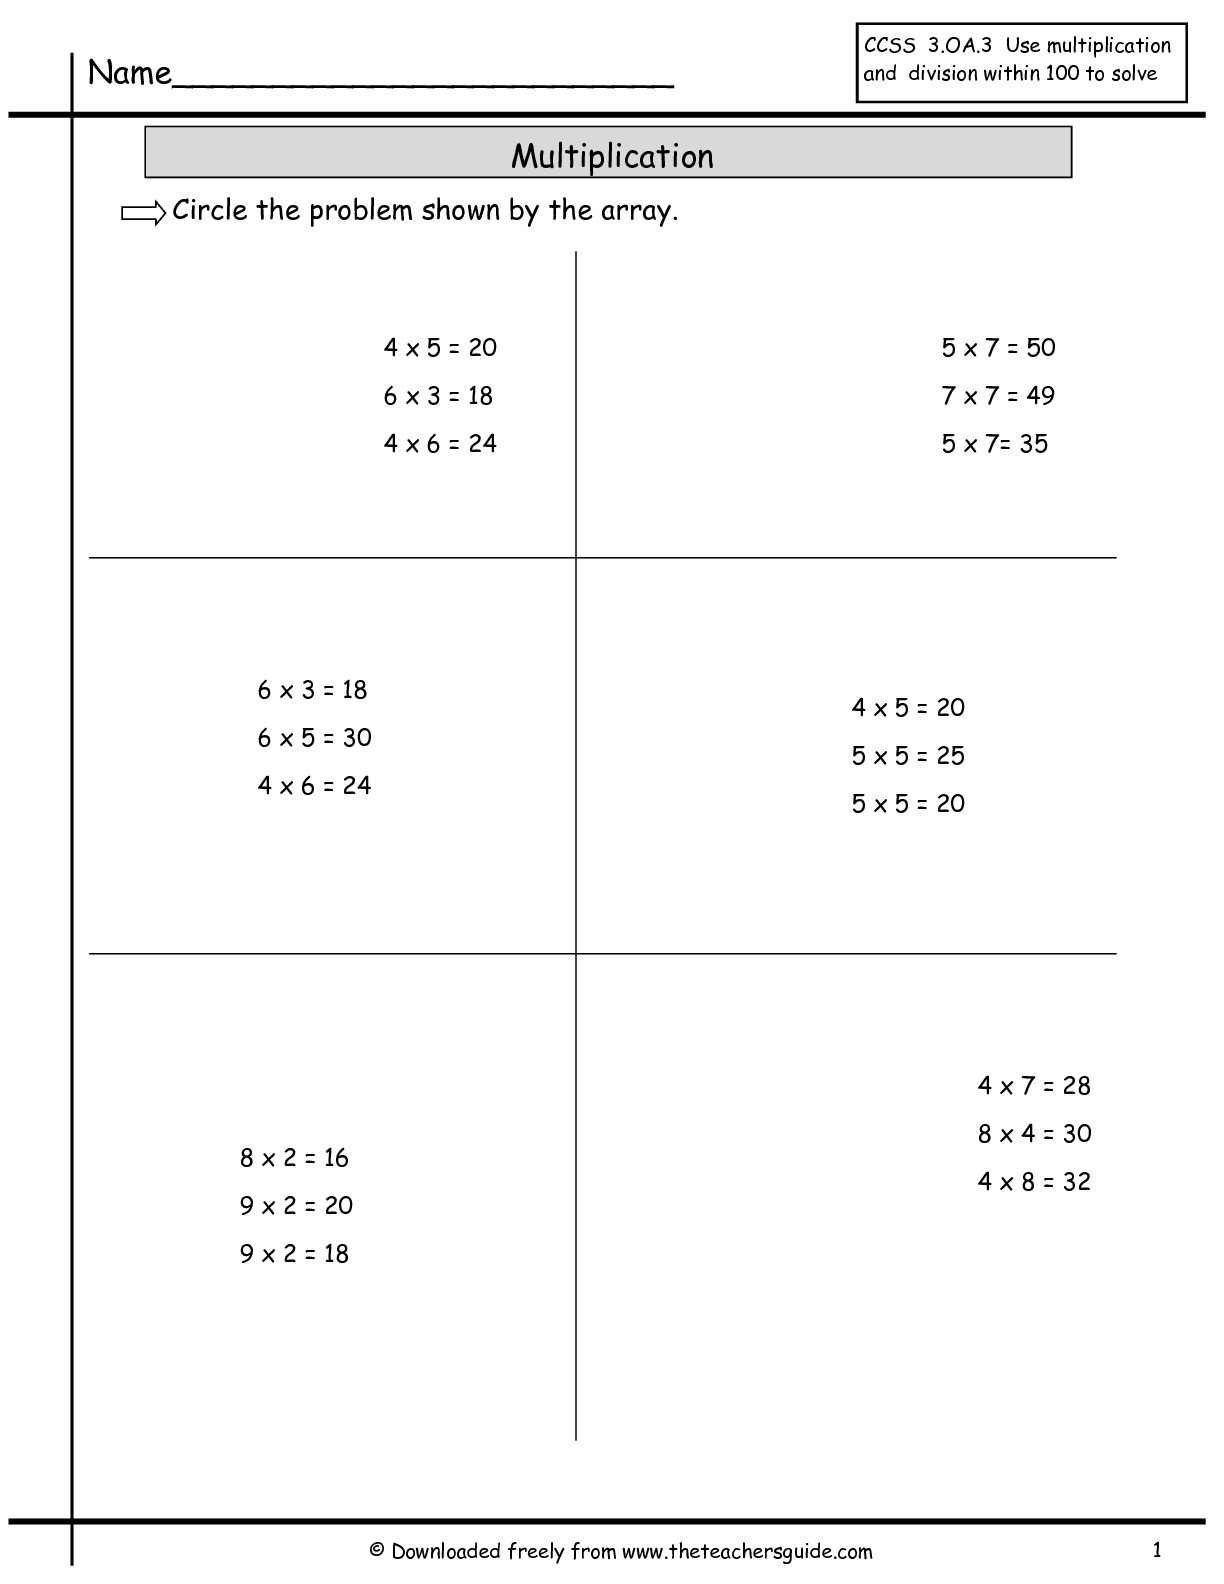 Multiplication Array Worksheets From The Teacher&amp;#039;s Guide for Printable Multiplication Array Worksheets